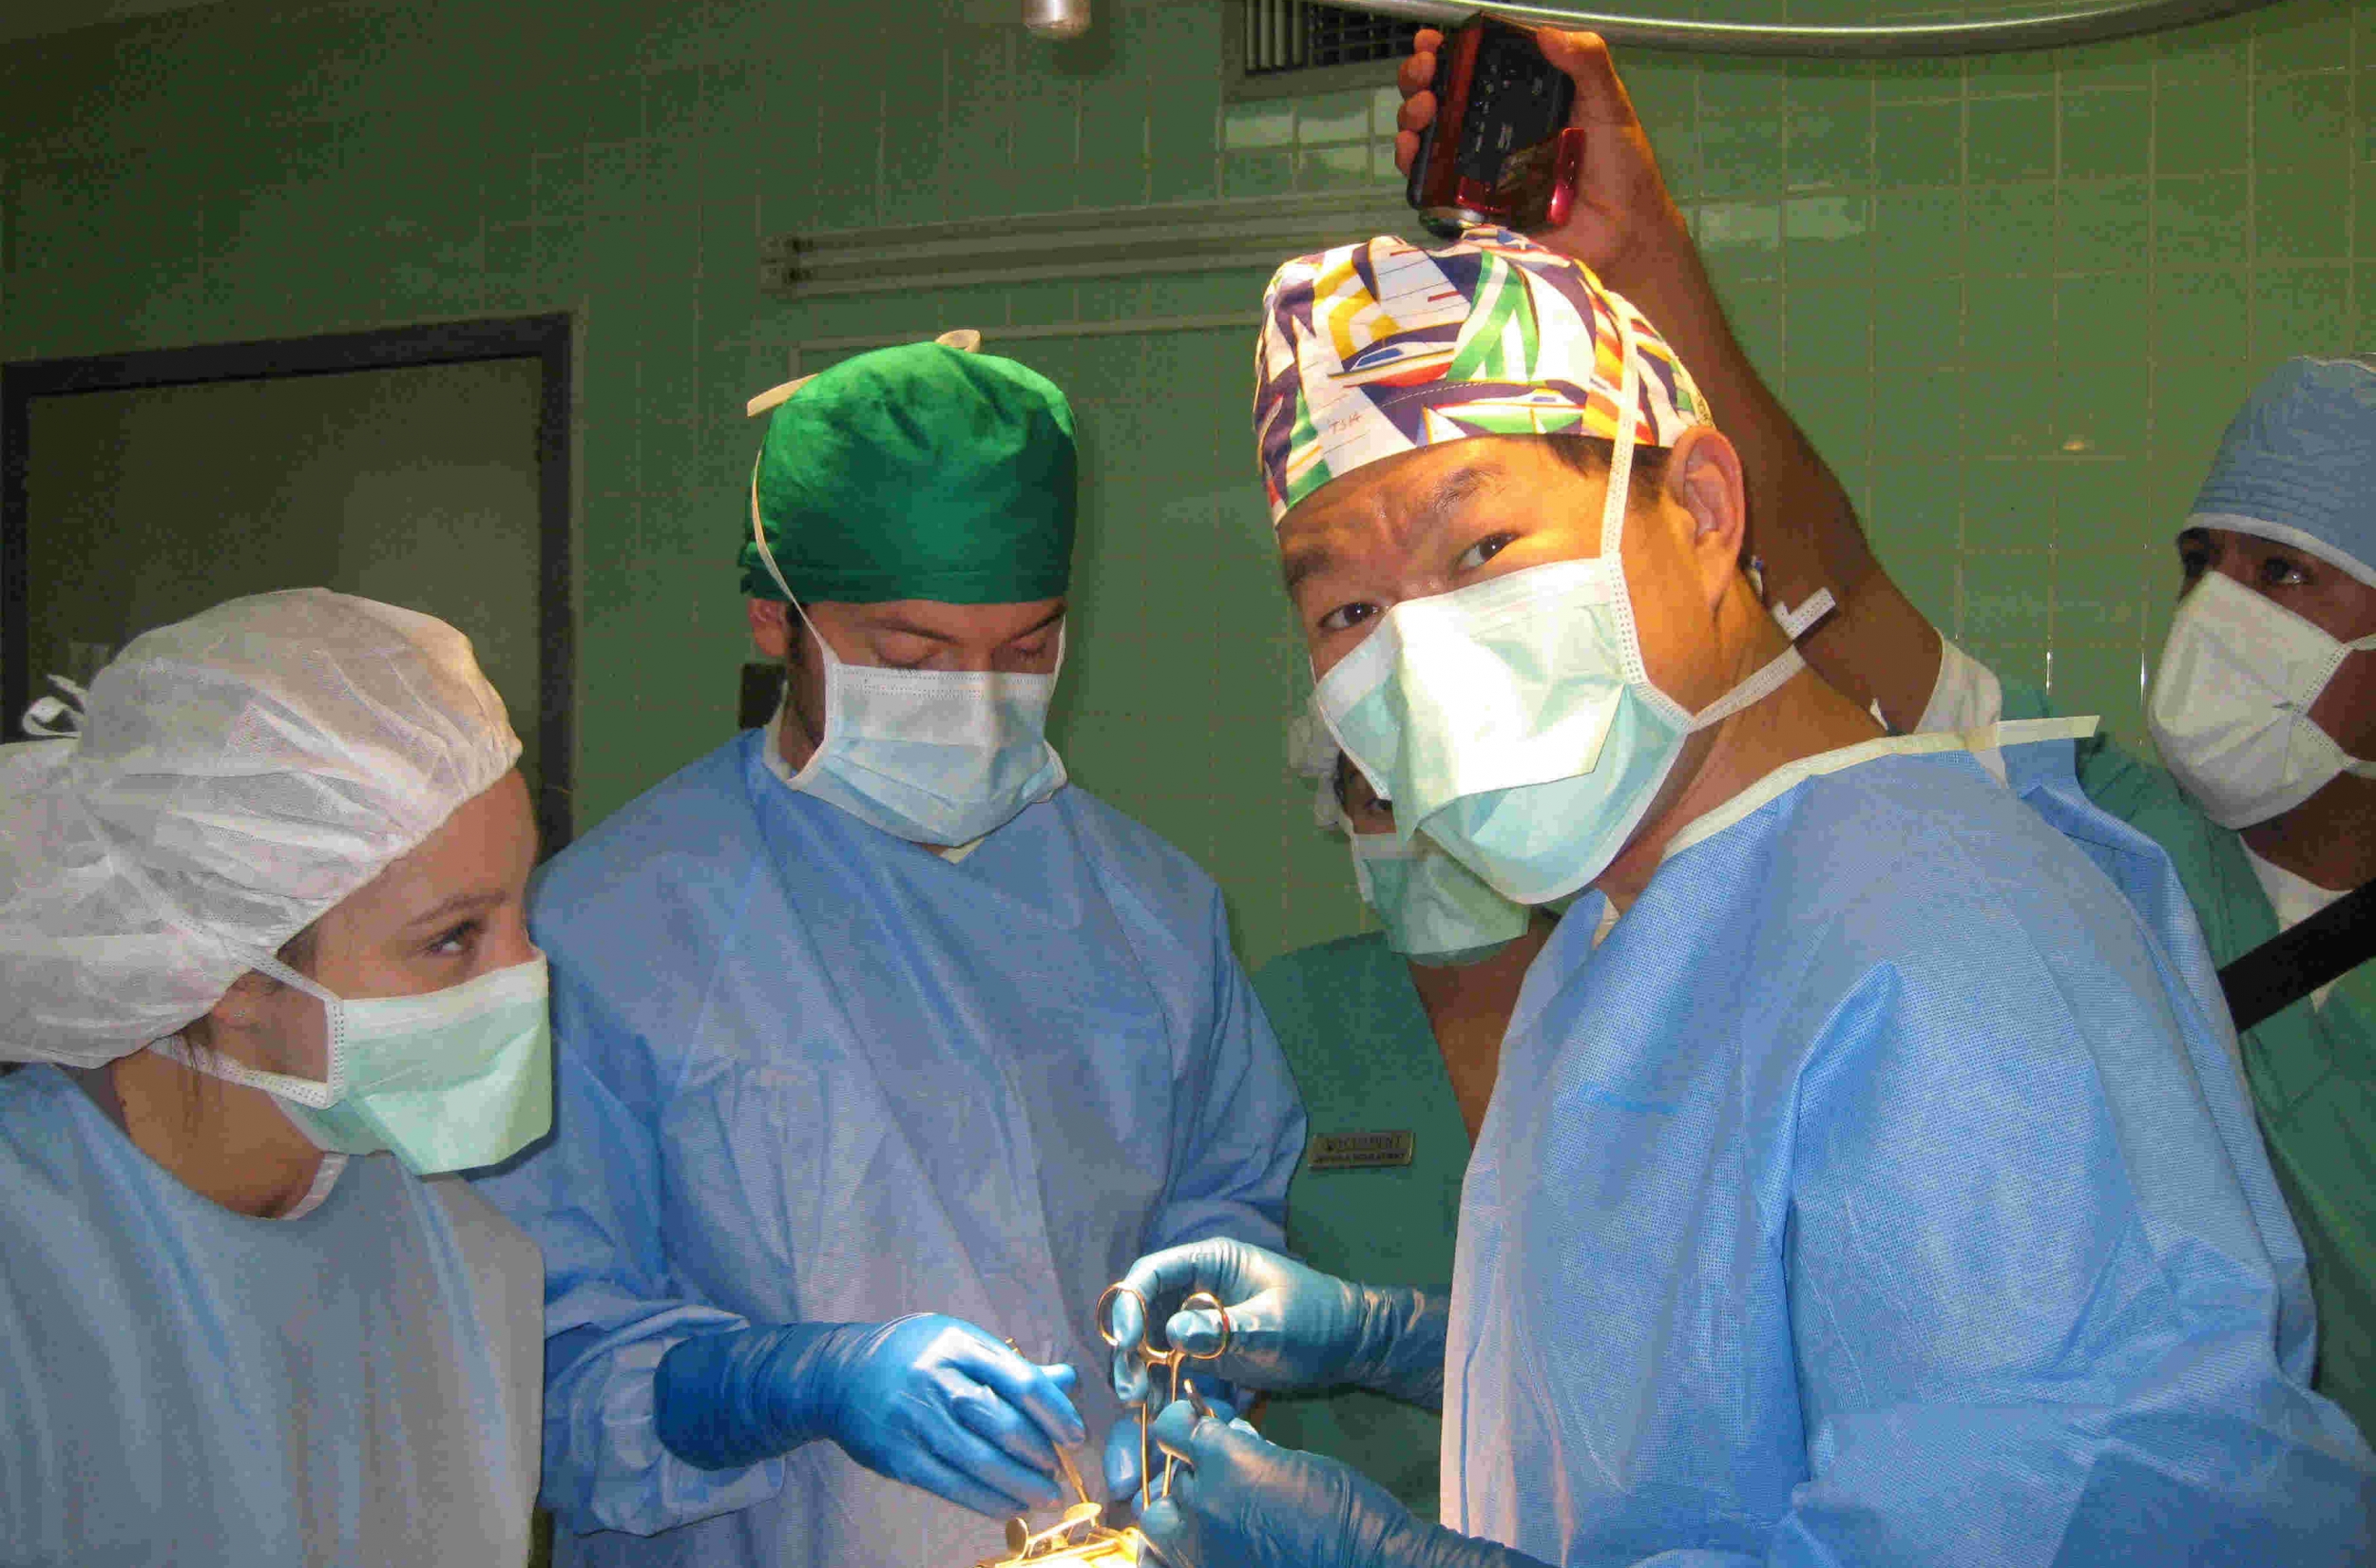 Dr. Kung in surgery